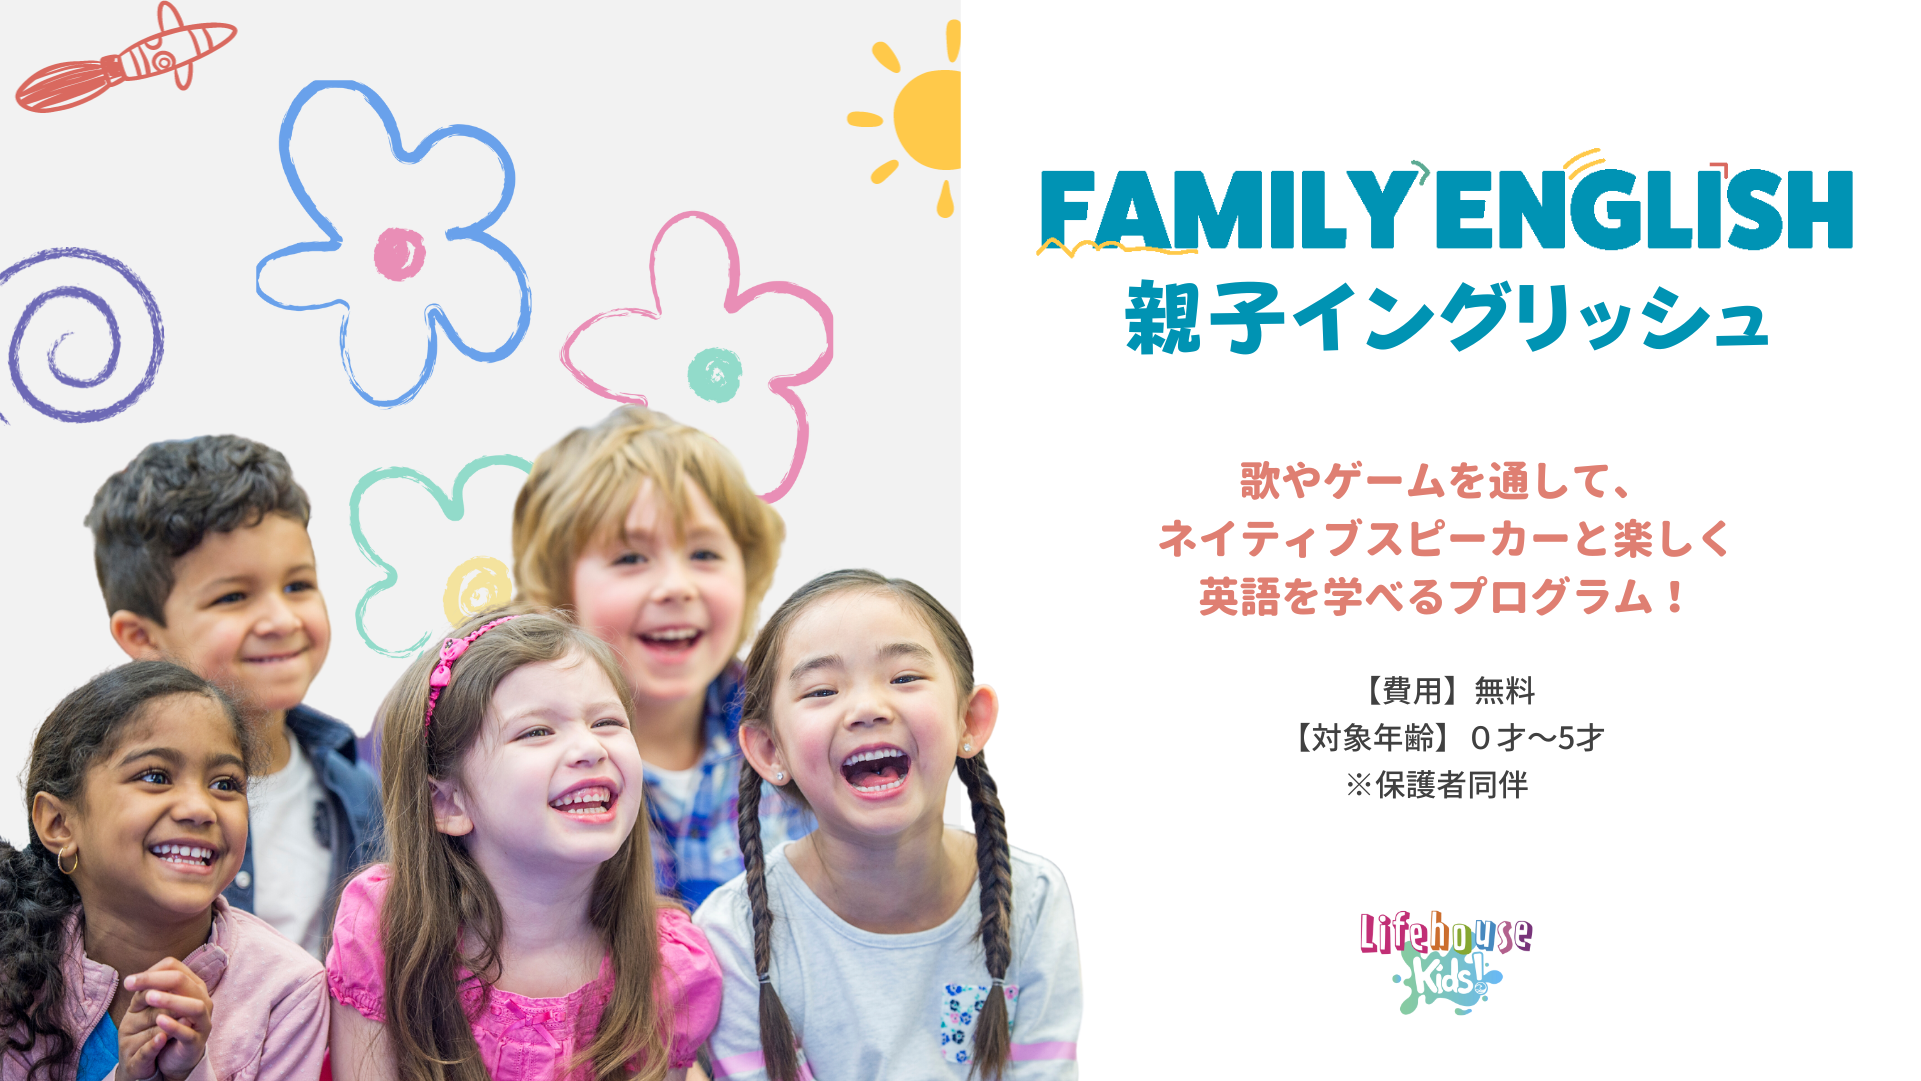 Featured image for “Family English 5/19”